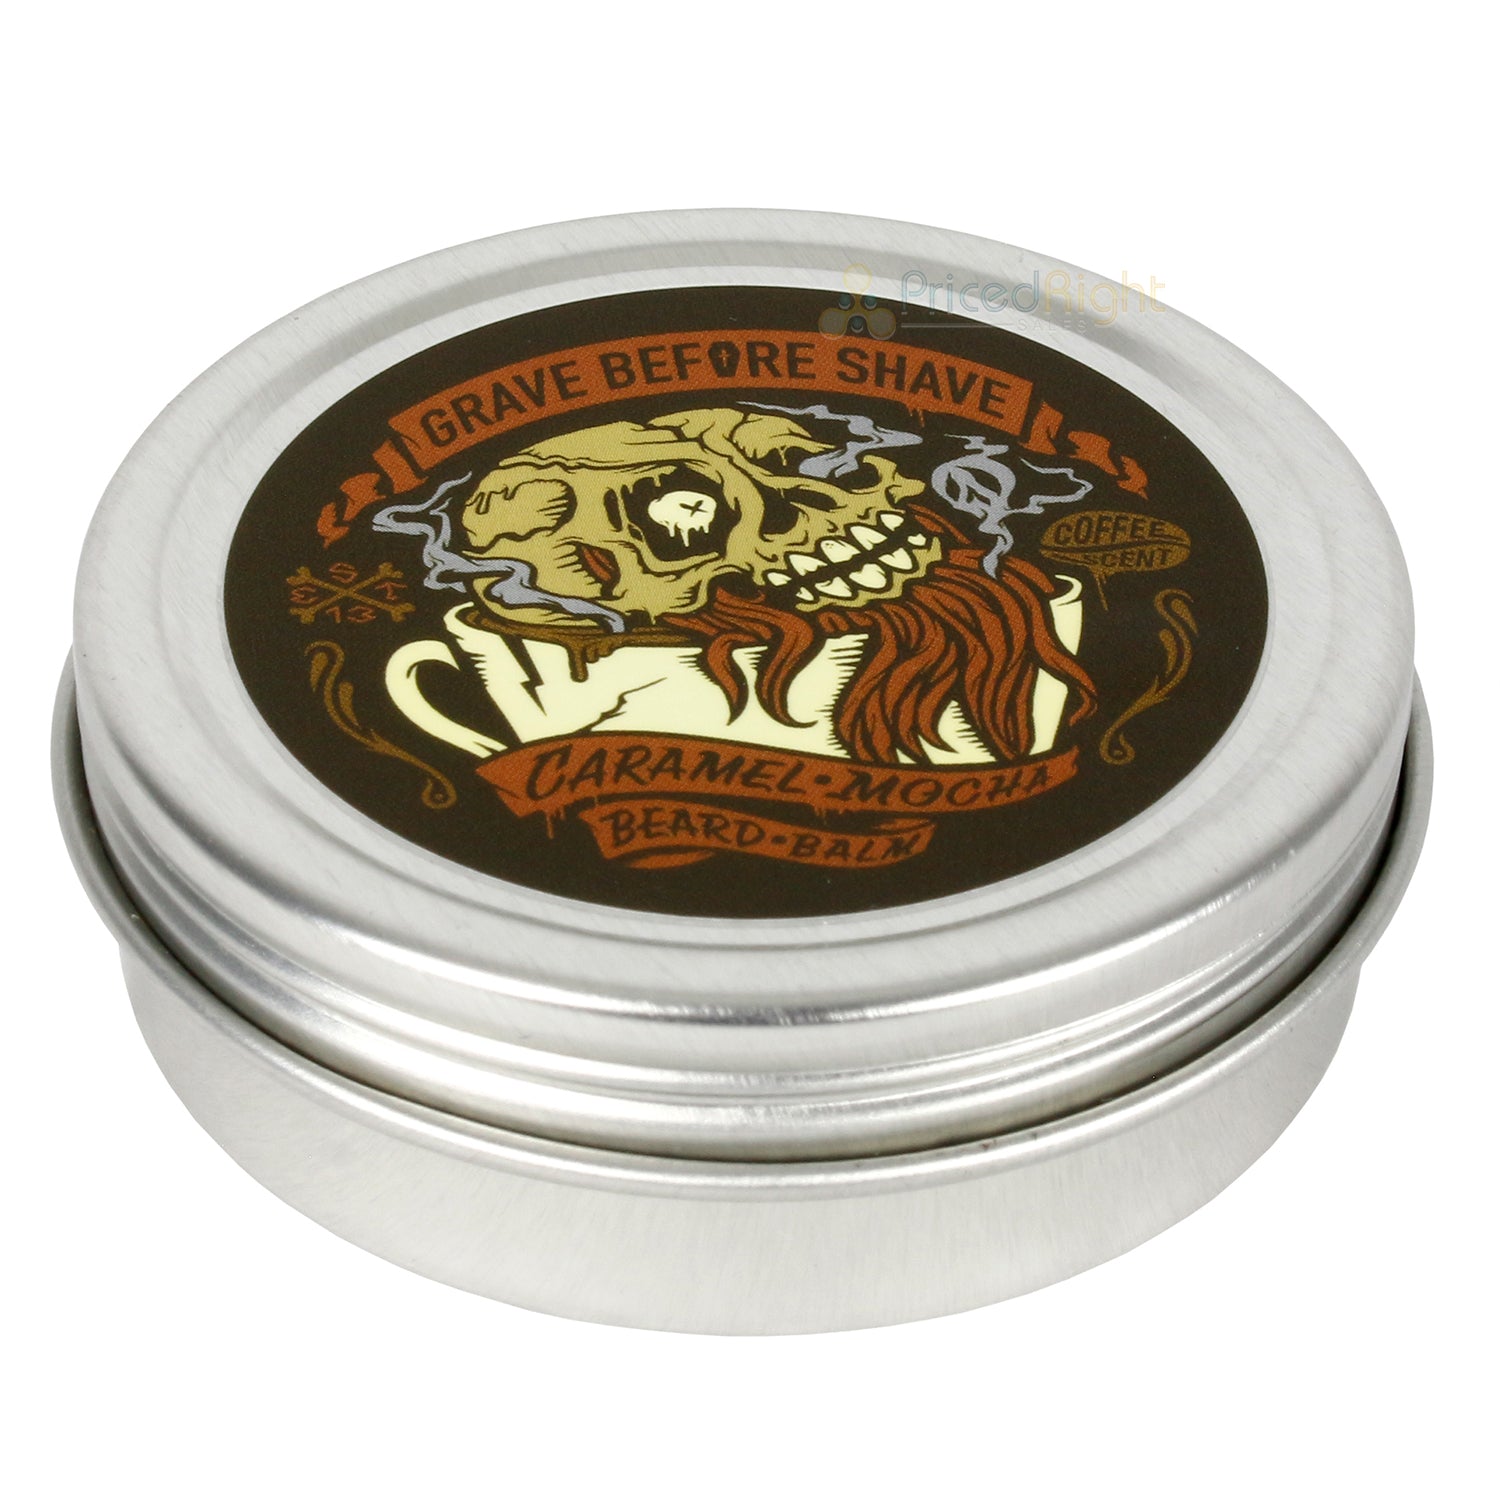 Grave Before Shave Handcrafted Beard Balm Caramel Mocha Coffee Scent 2 Ounce